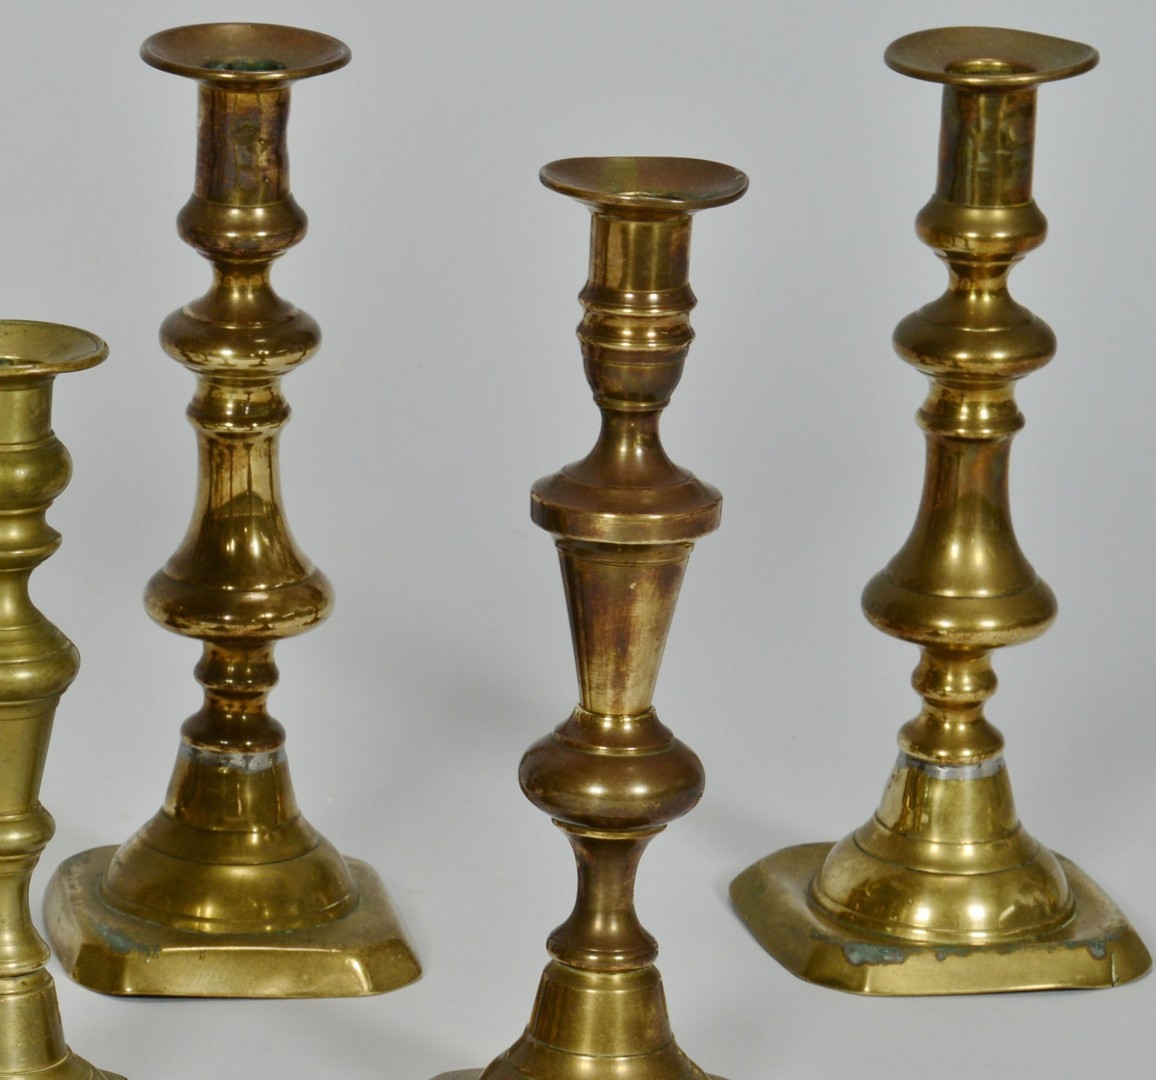 Lot 426: Grouping of 10 Brass Candlesticks, 5 pairs